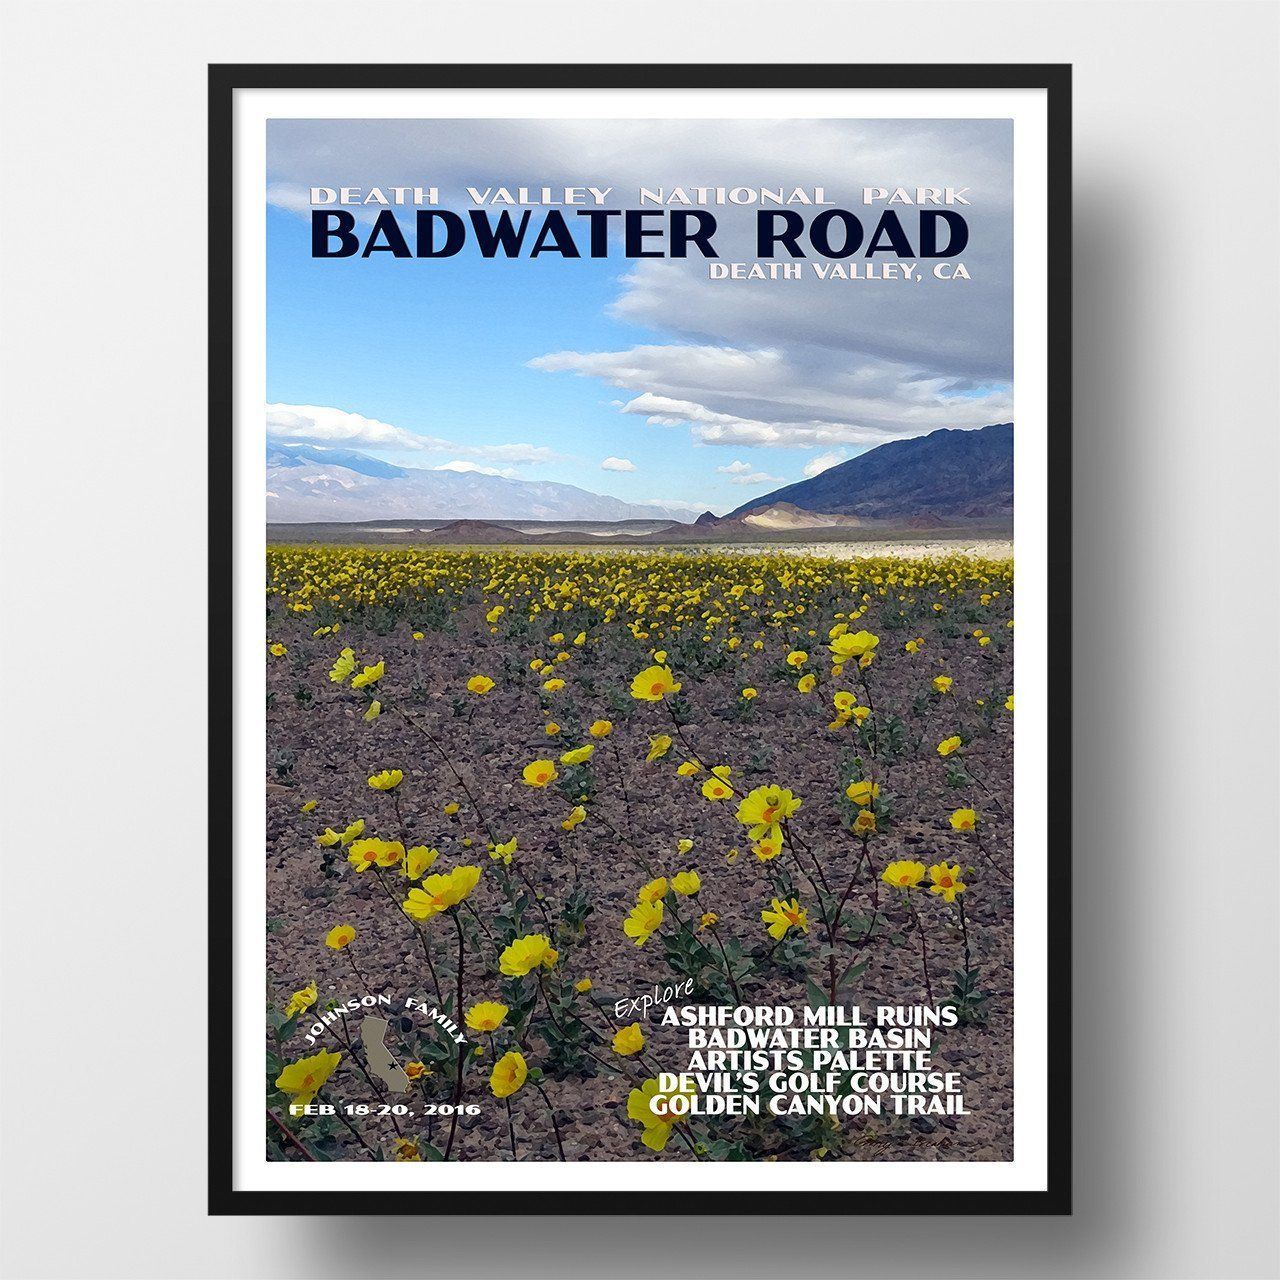 Death Valley National Park Poster-Badwater Road Wildflowers near Basin (Personalized)